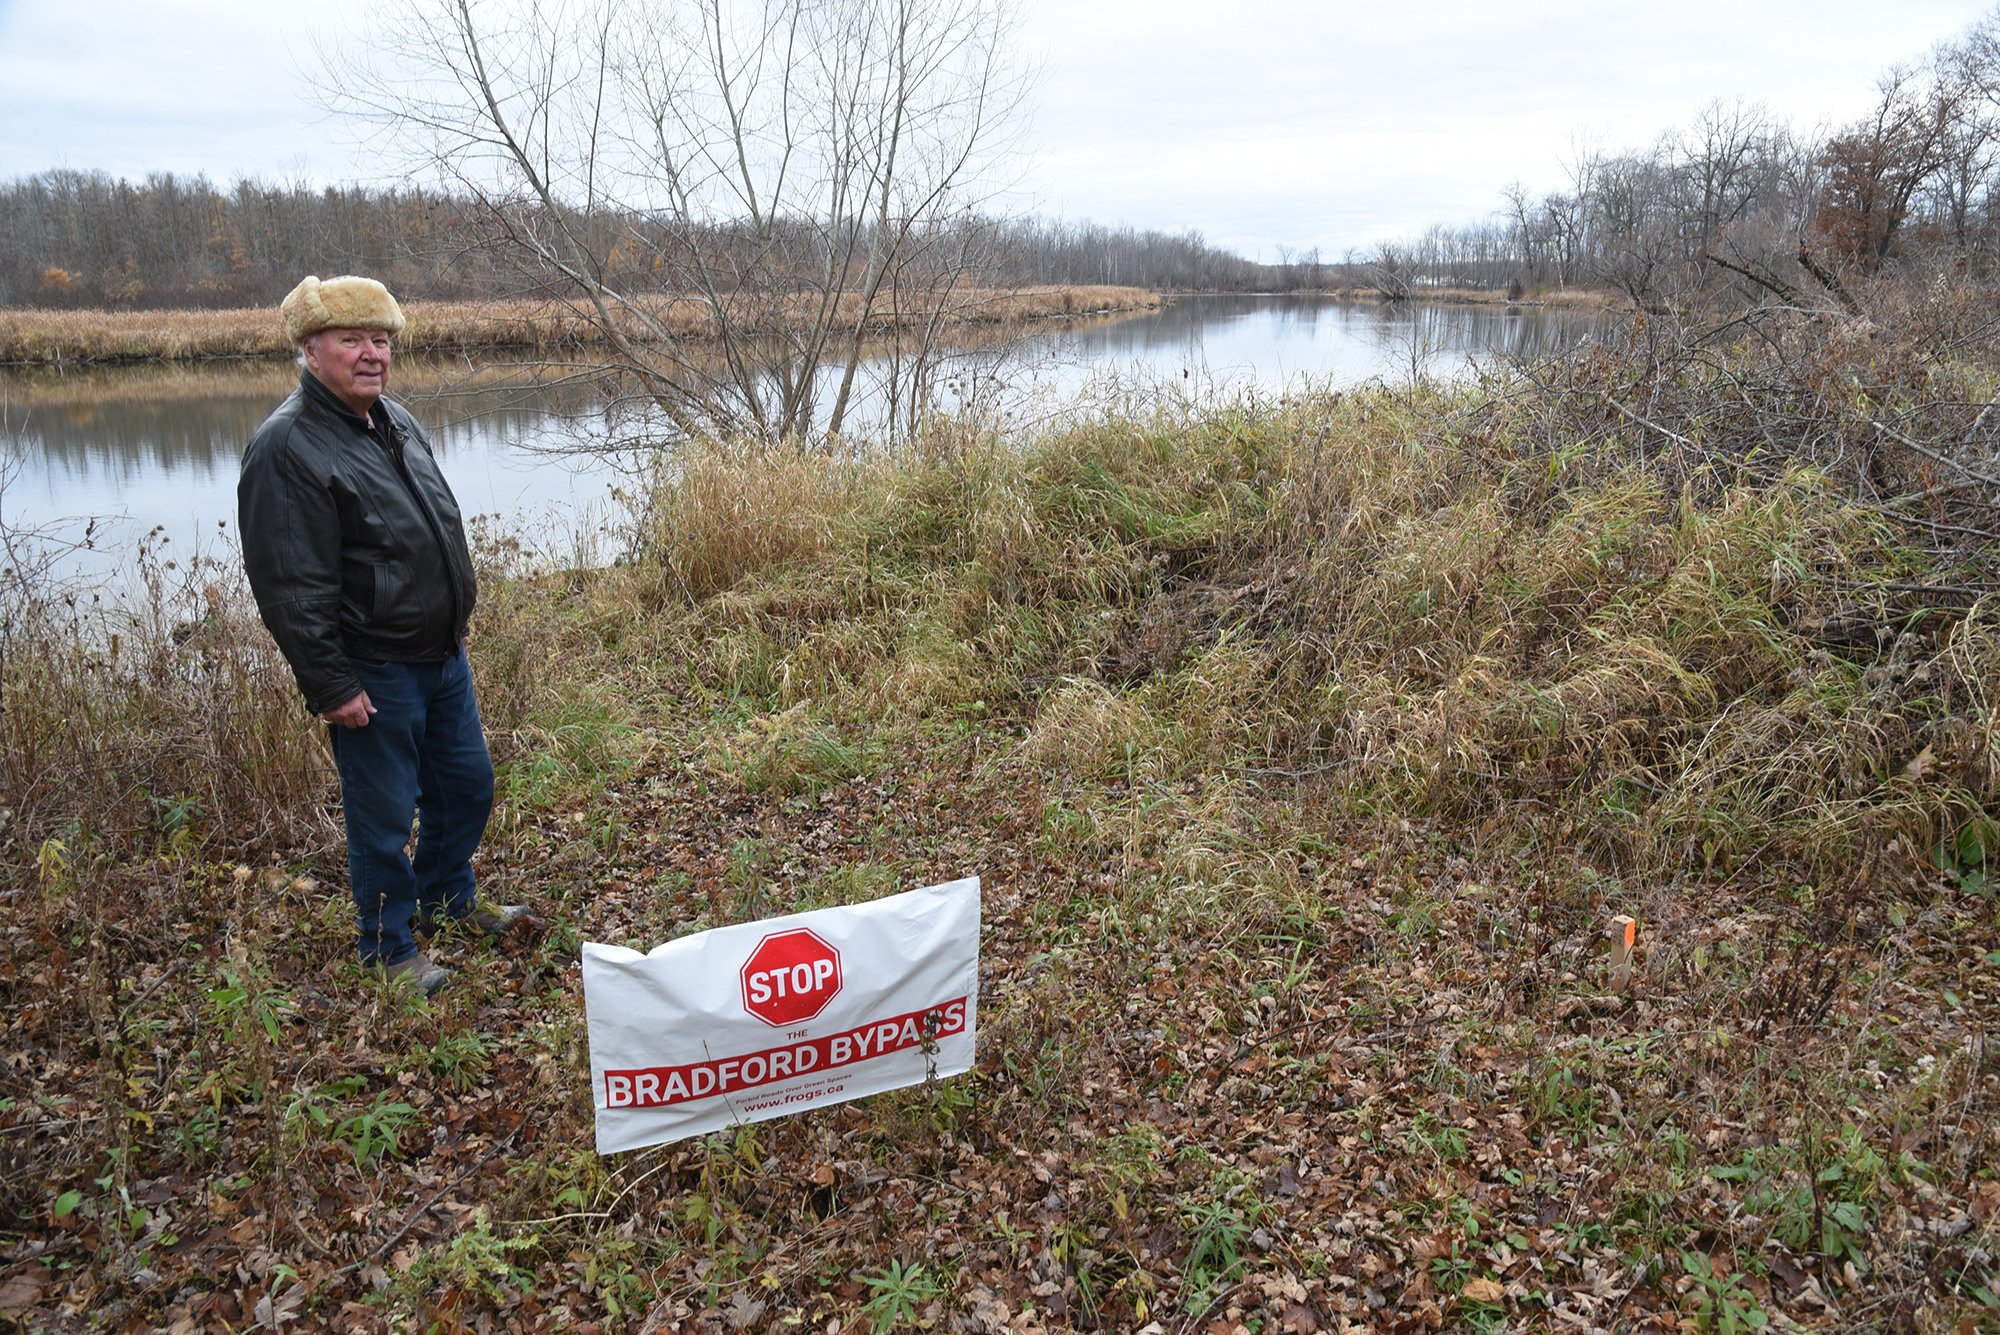 A man stands by the bank of the Holland River behind a sign that says "stop the bradford bypass"